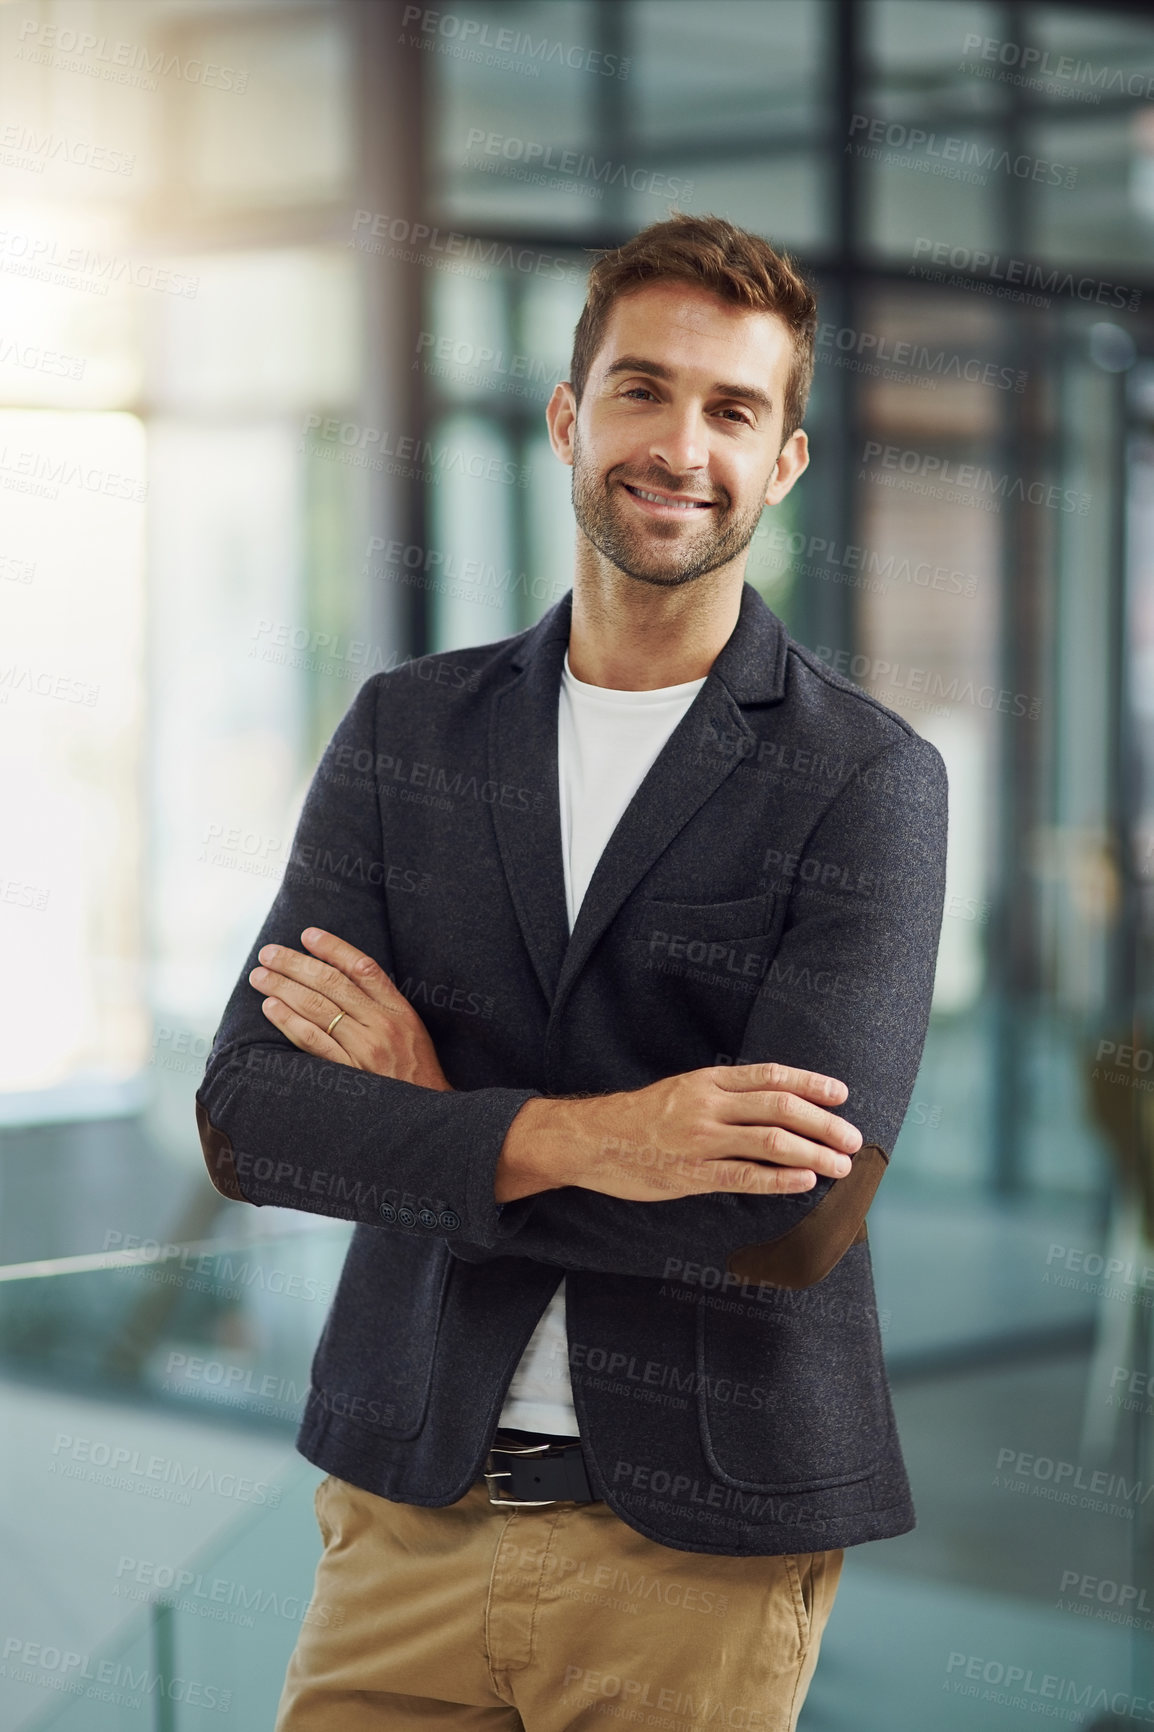 Buy stock photo Portrait shot of a handsome businessman standing with his arms crossed